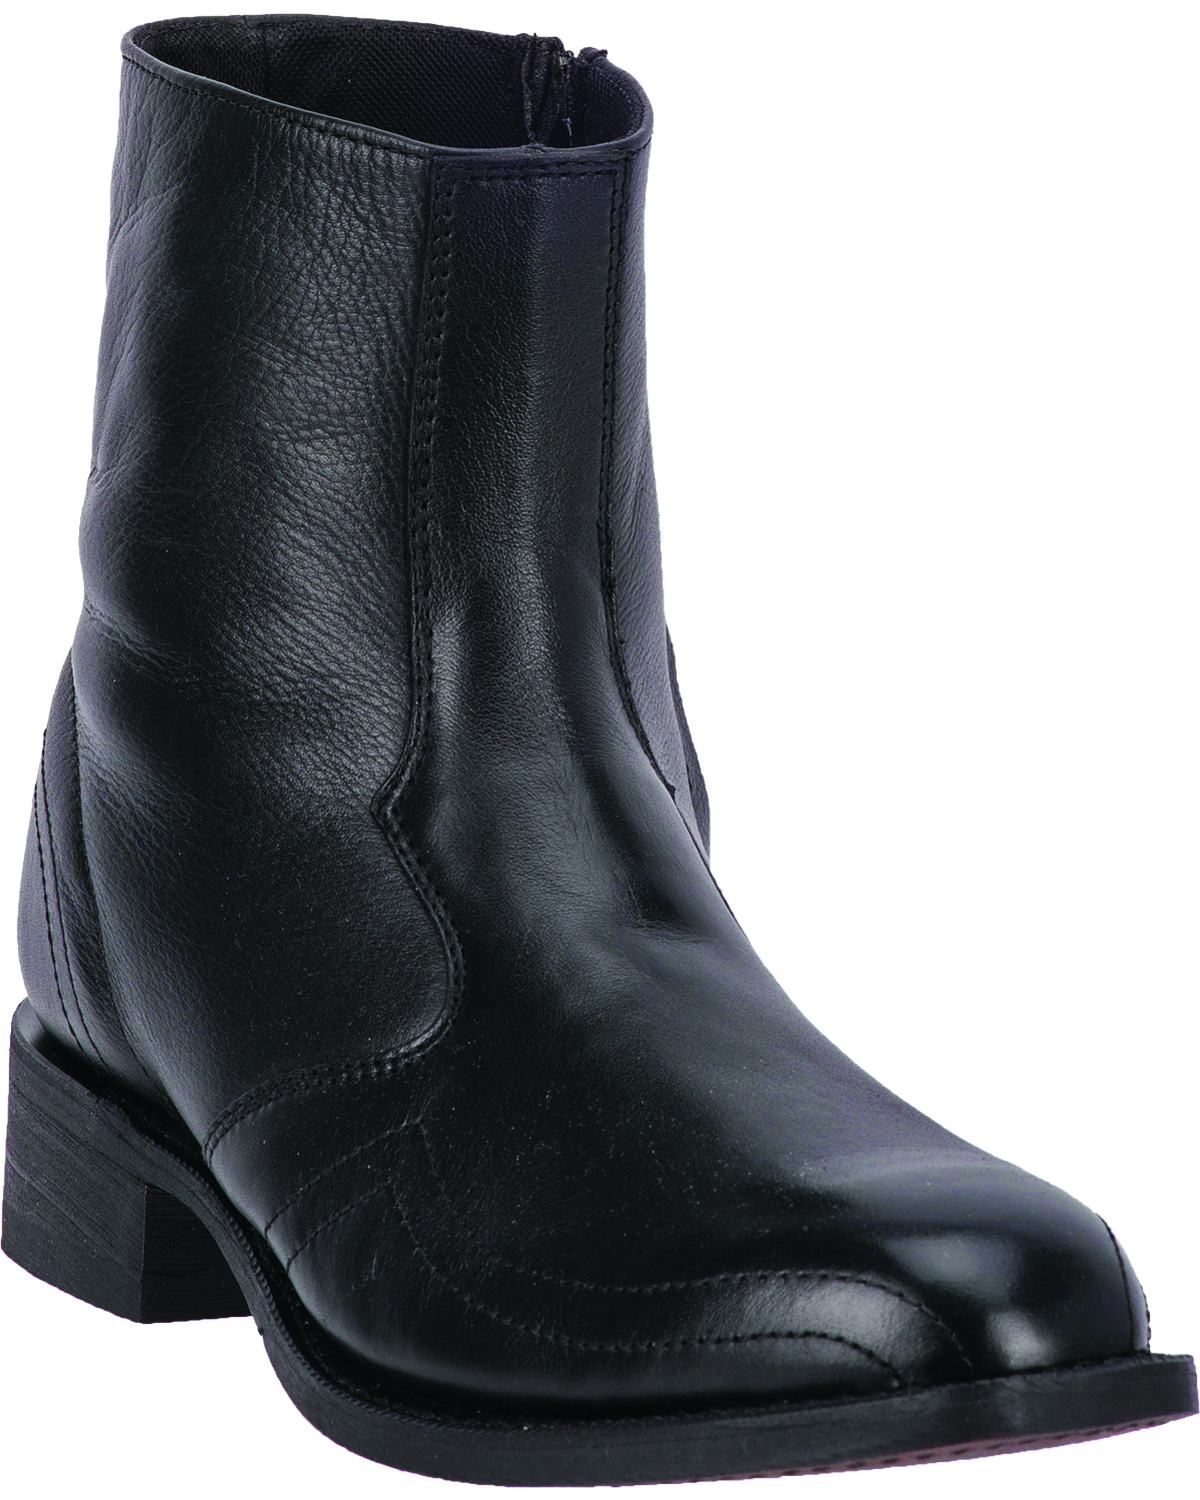 mens black leather side zip boots